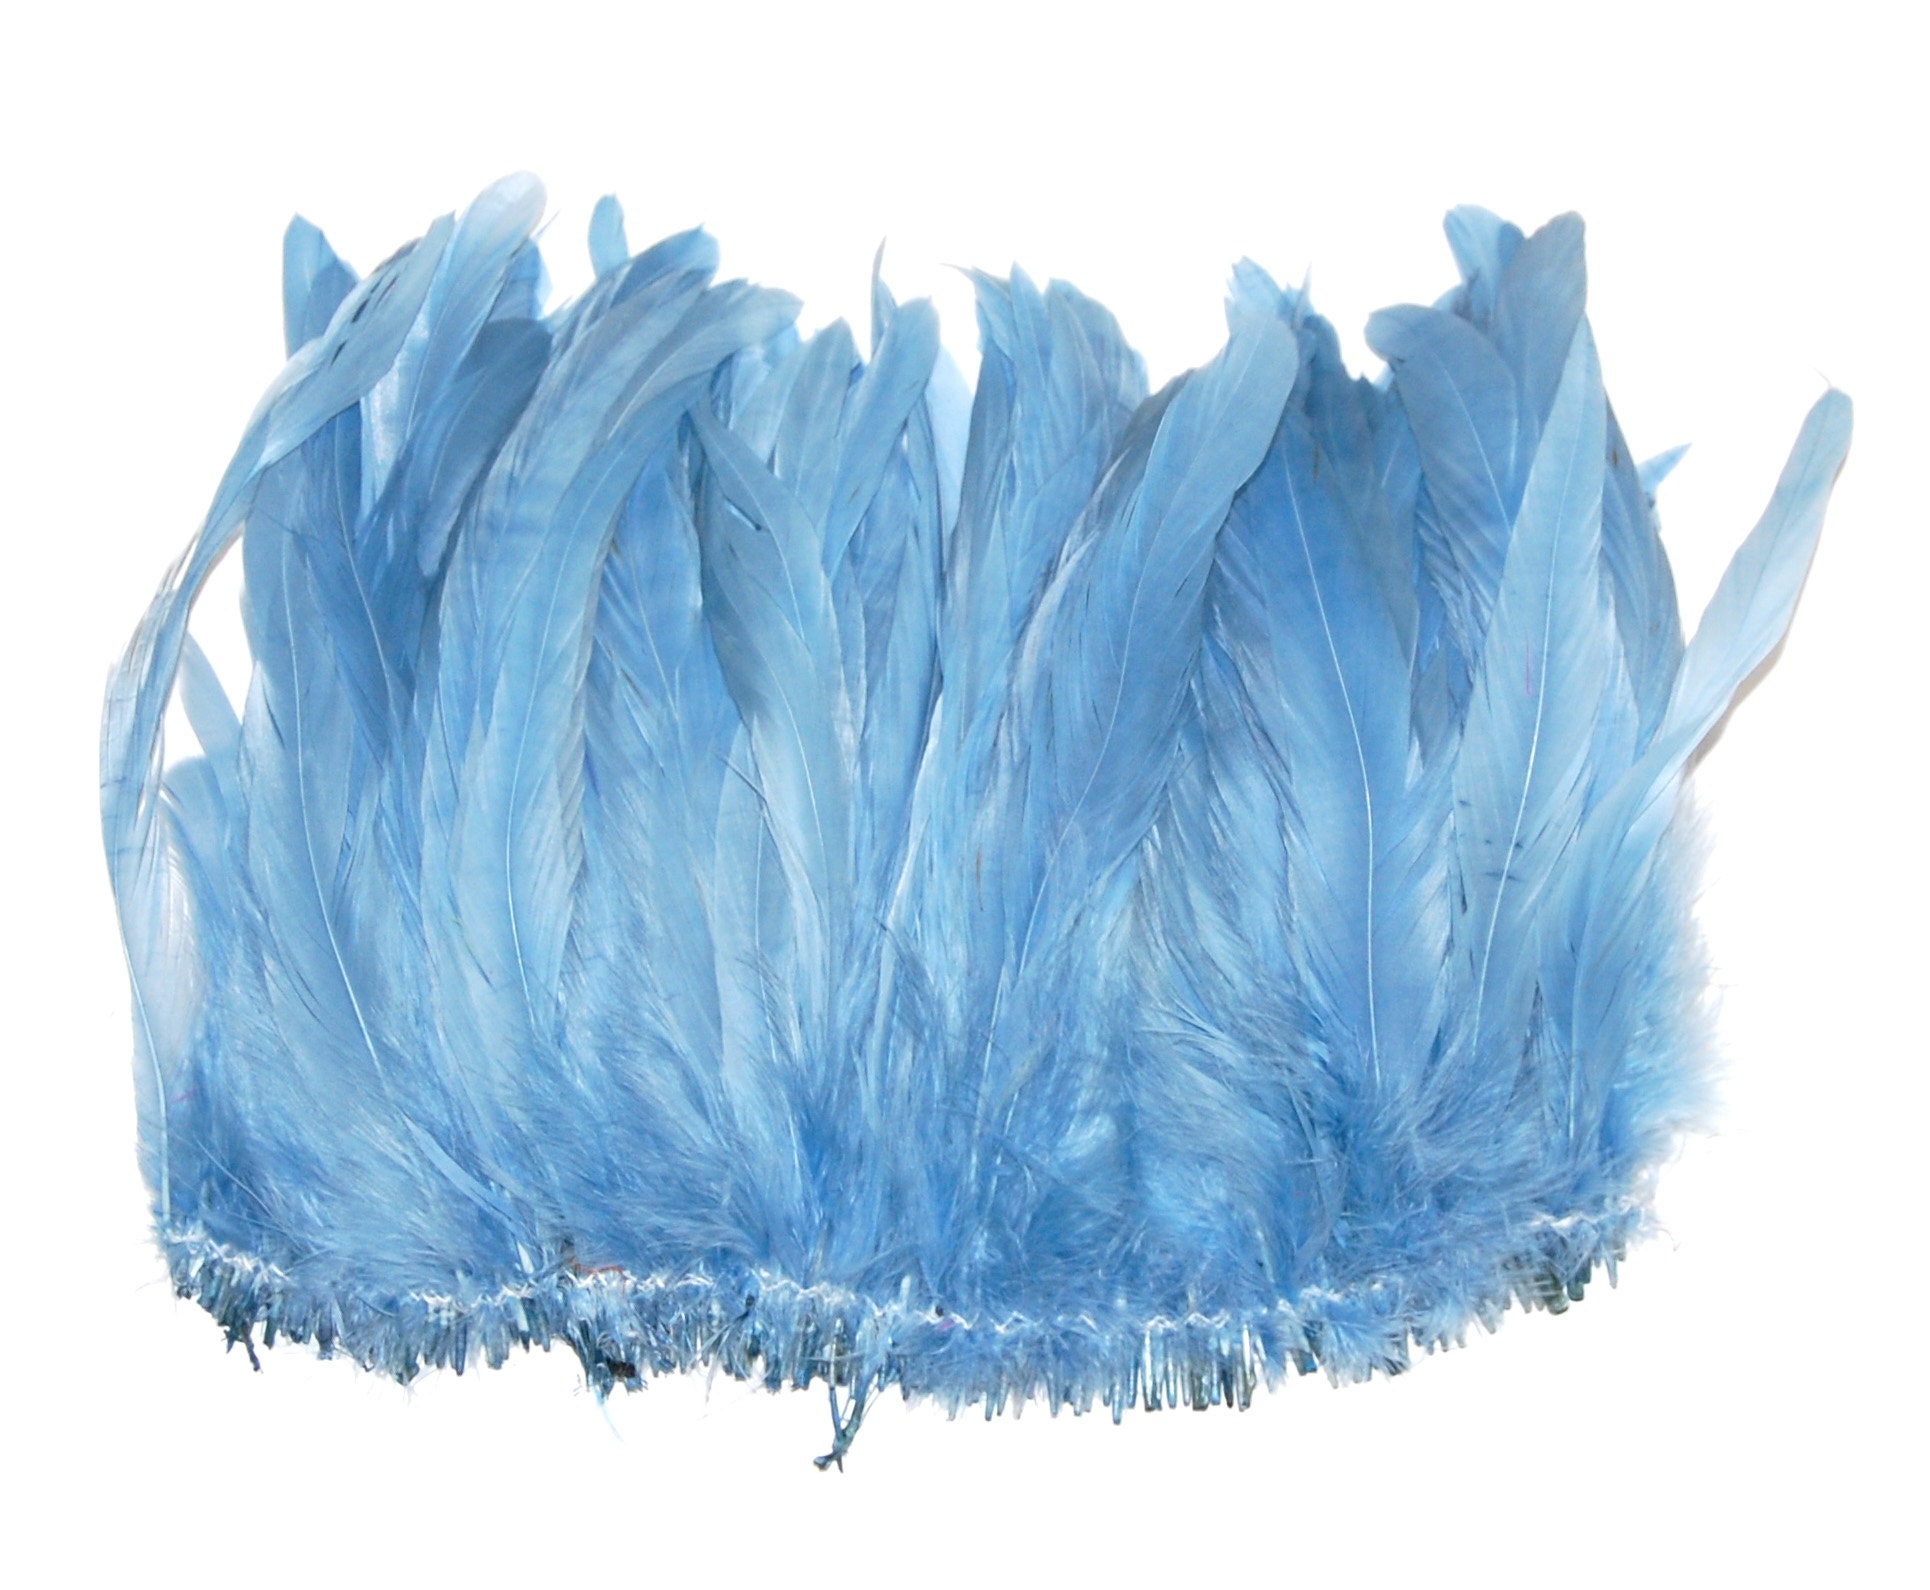 Black Rooster Coque Tail Feathers, Strung, per Yard / Wholesale Bulk  Feathers 5 7 Long Price per Yard 